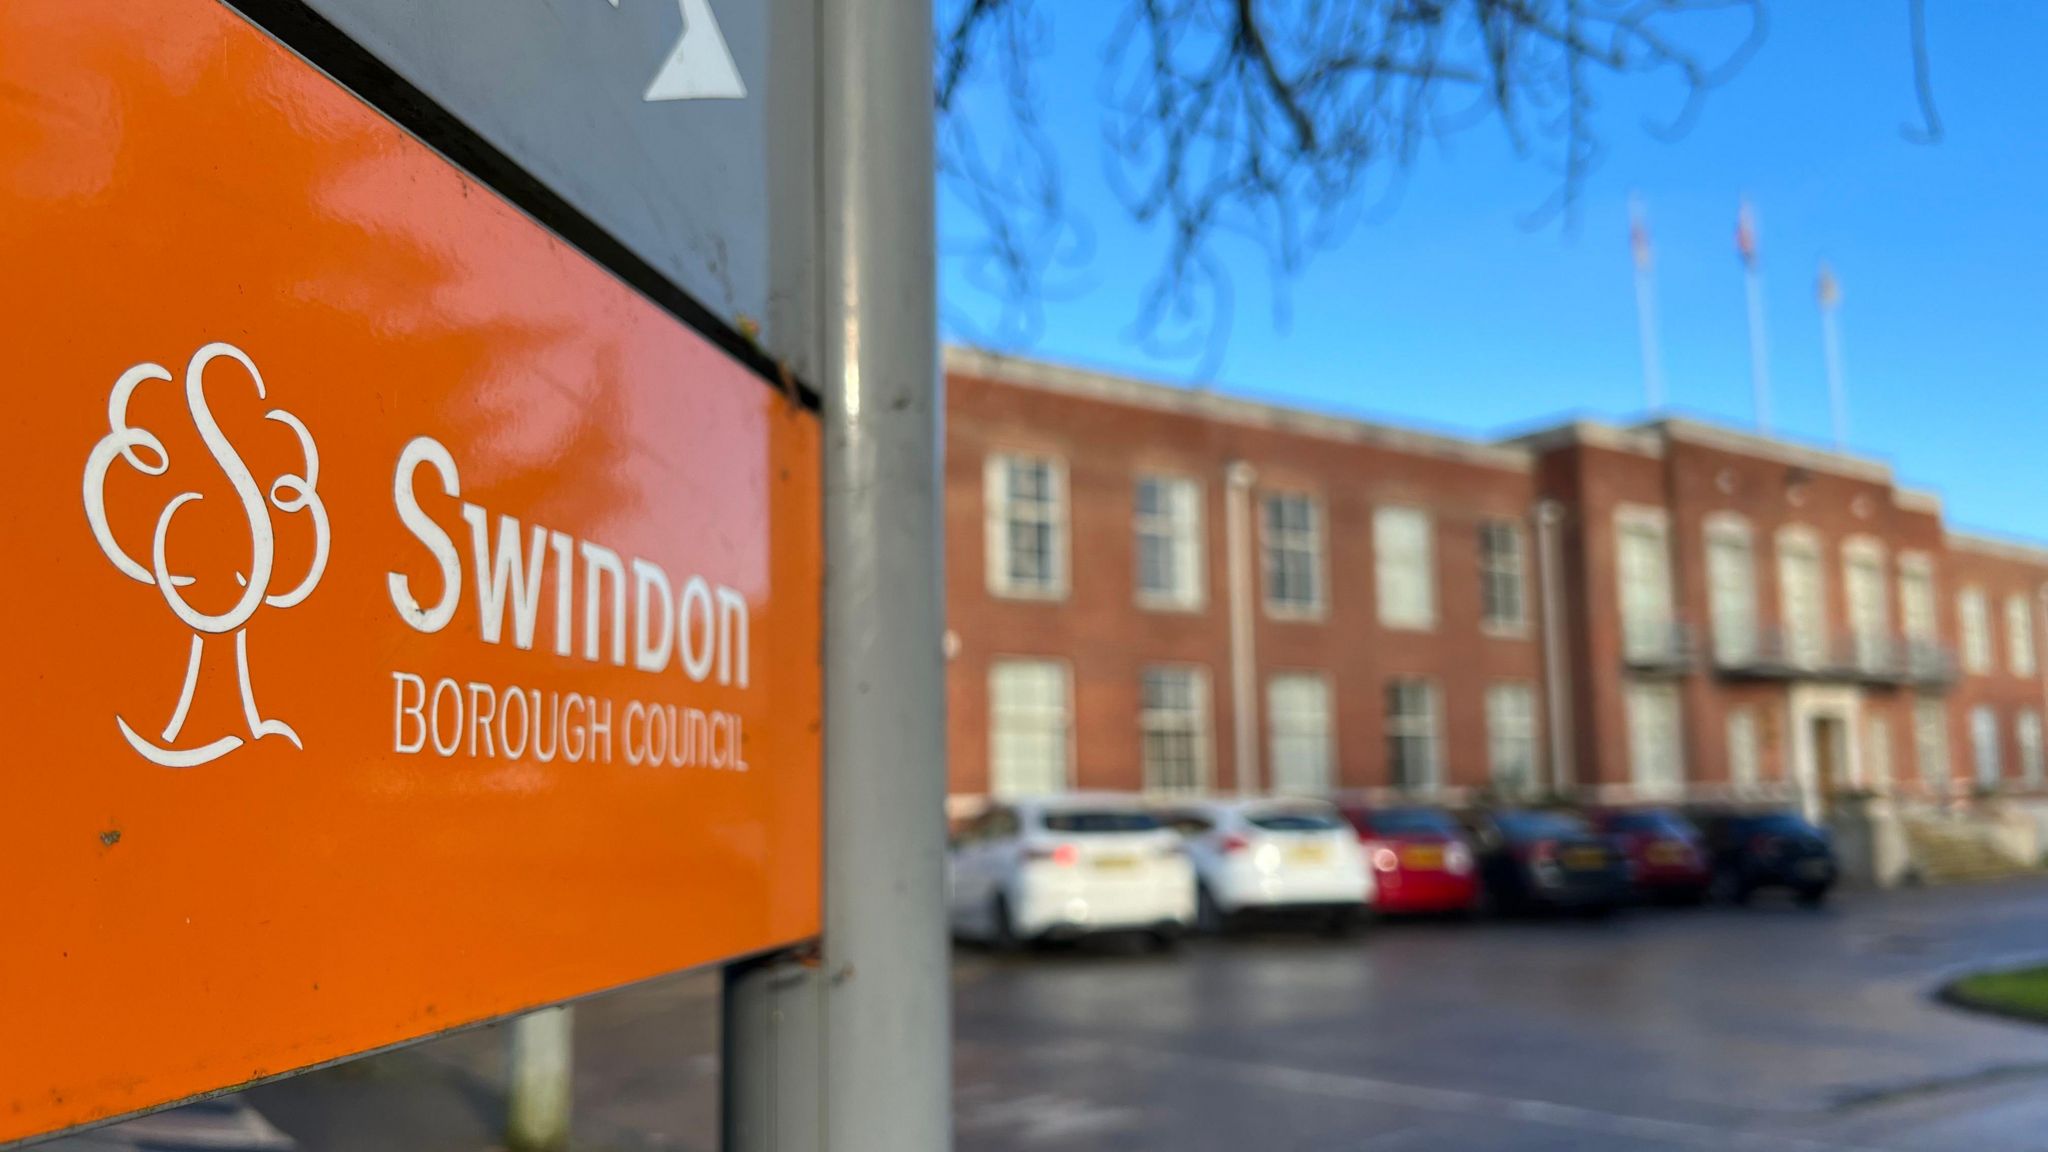 Orange Swindon Borough Council sign with offices in the background